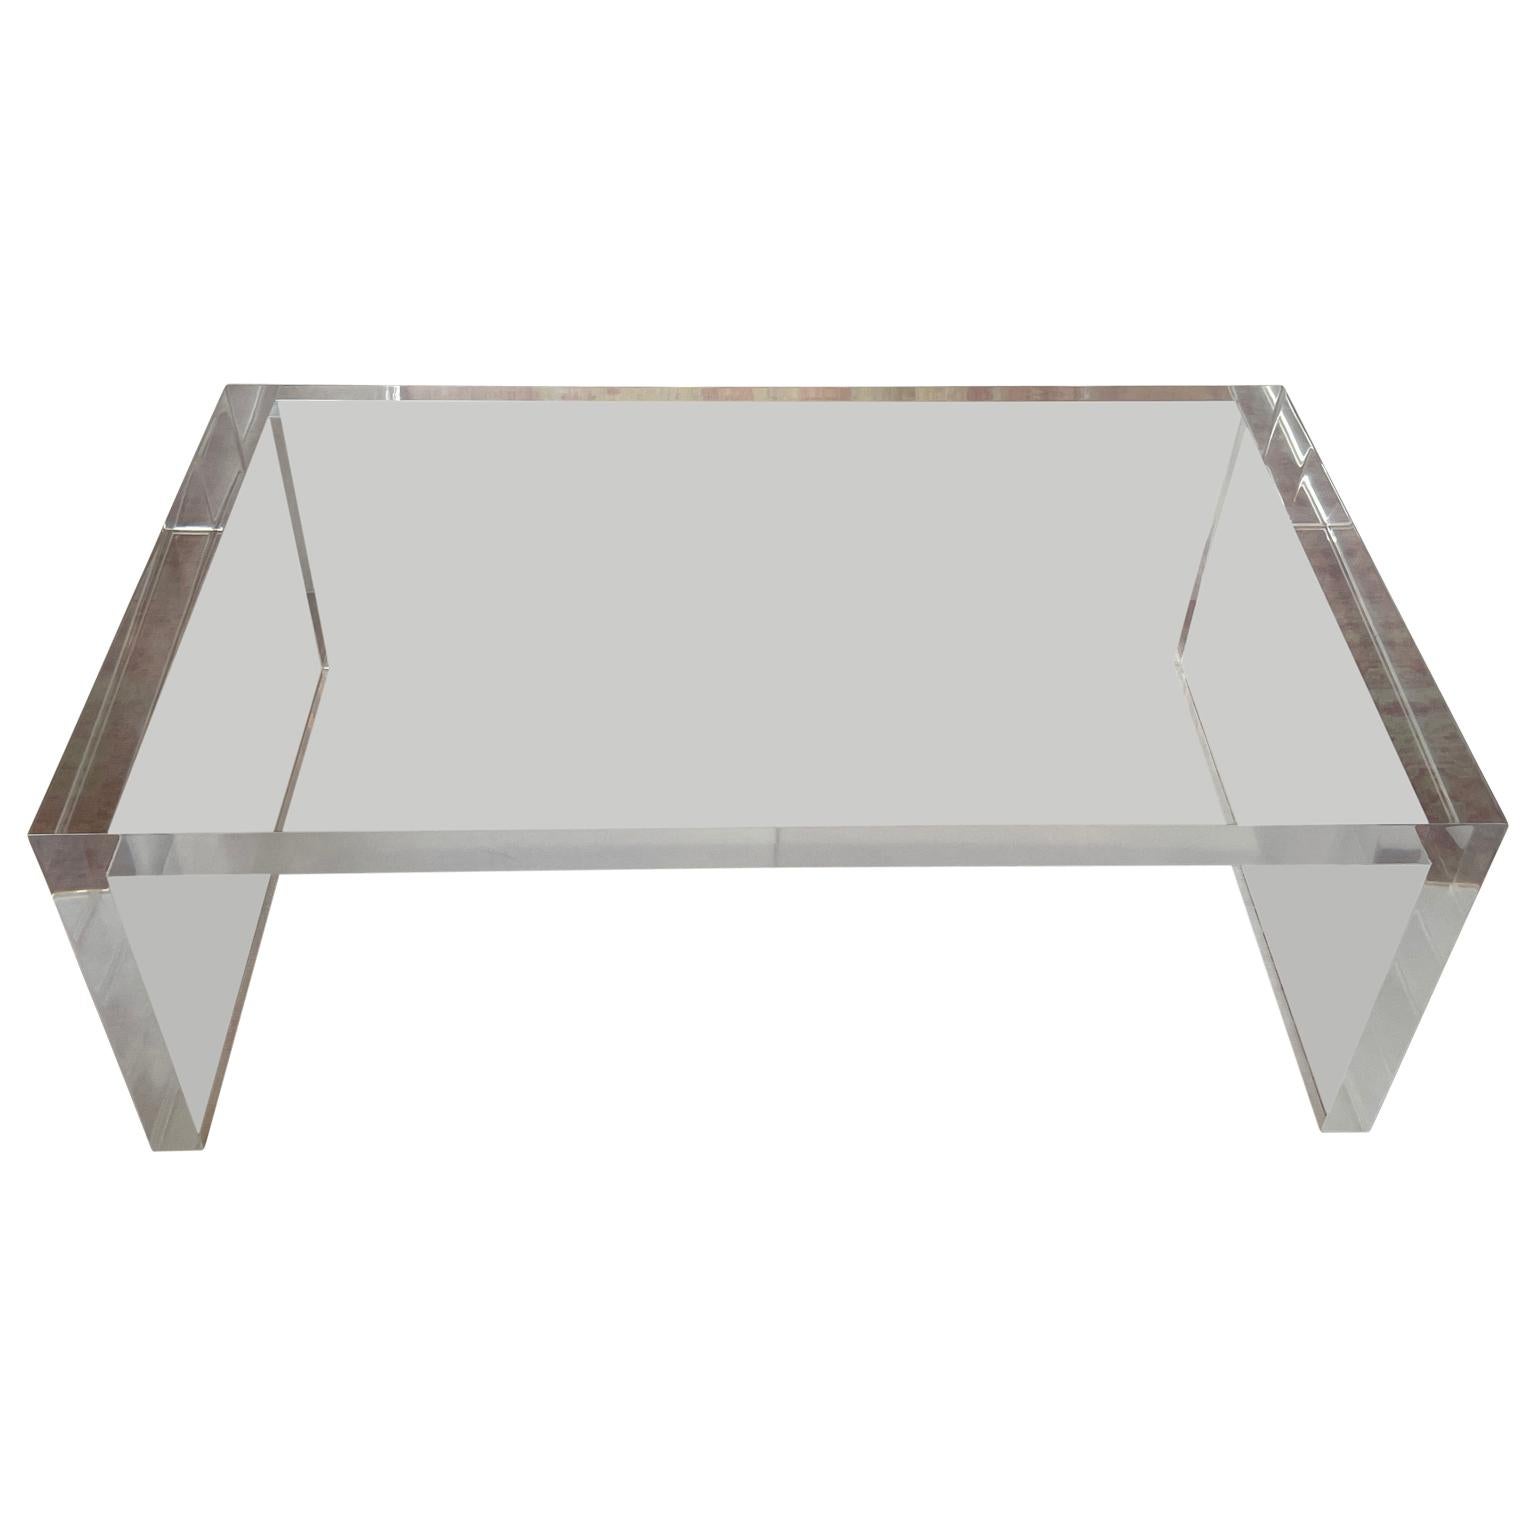 Modern Large Rectangular Thick Lucite Coffee or Cocktail Table Hollis Era